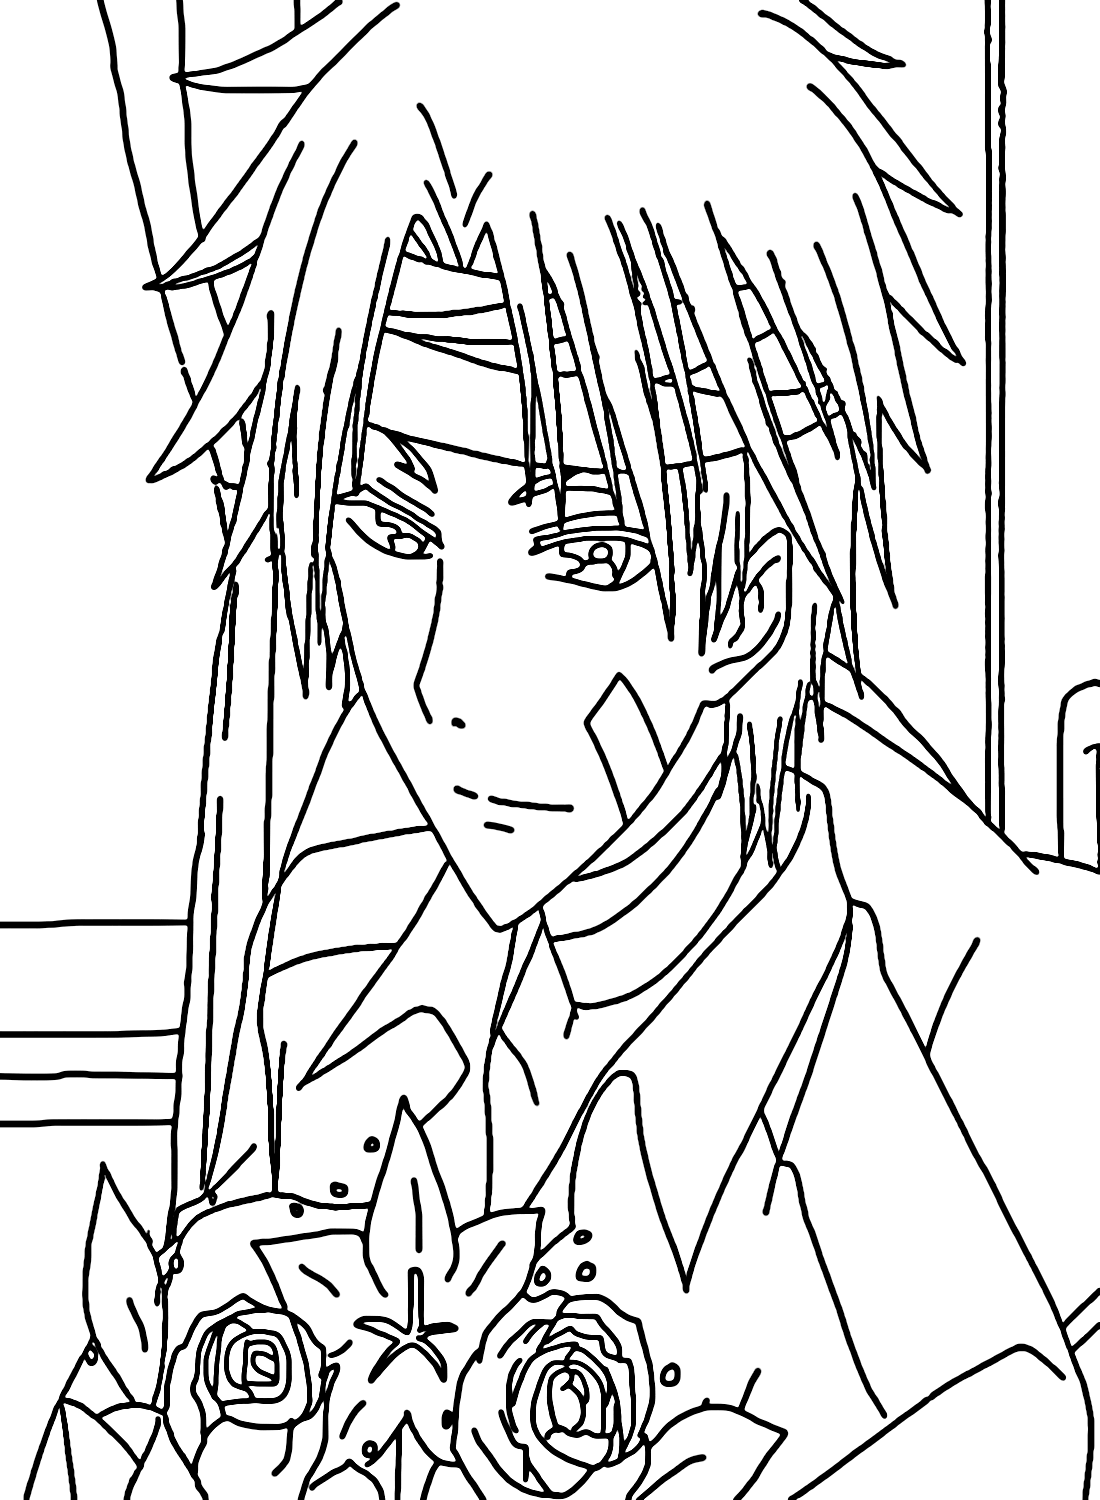 Takumi Usui Picture to Color from Takumi Usui